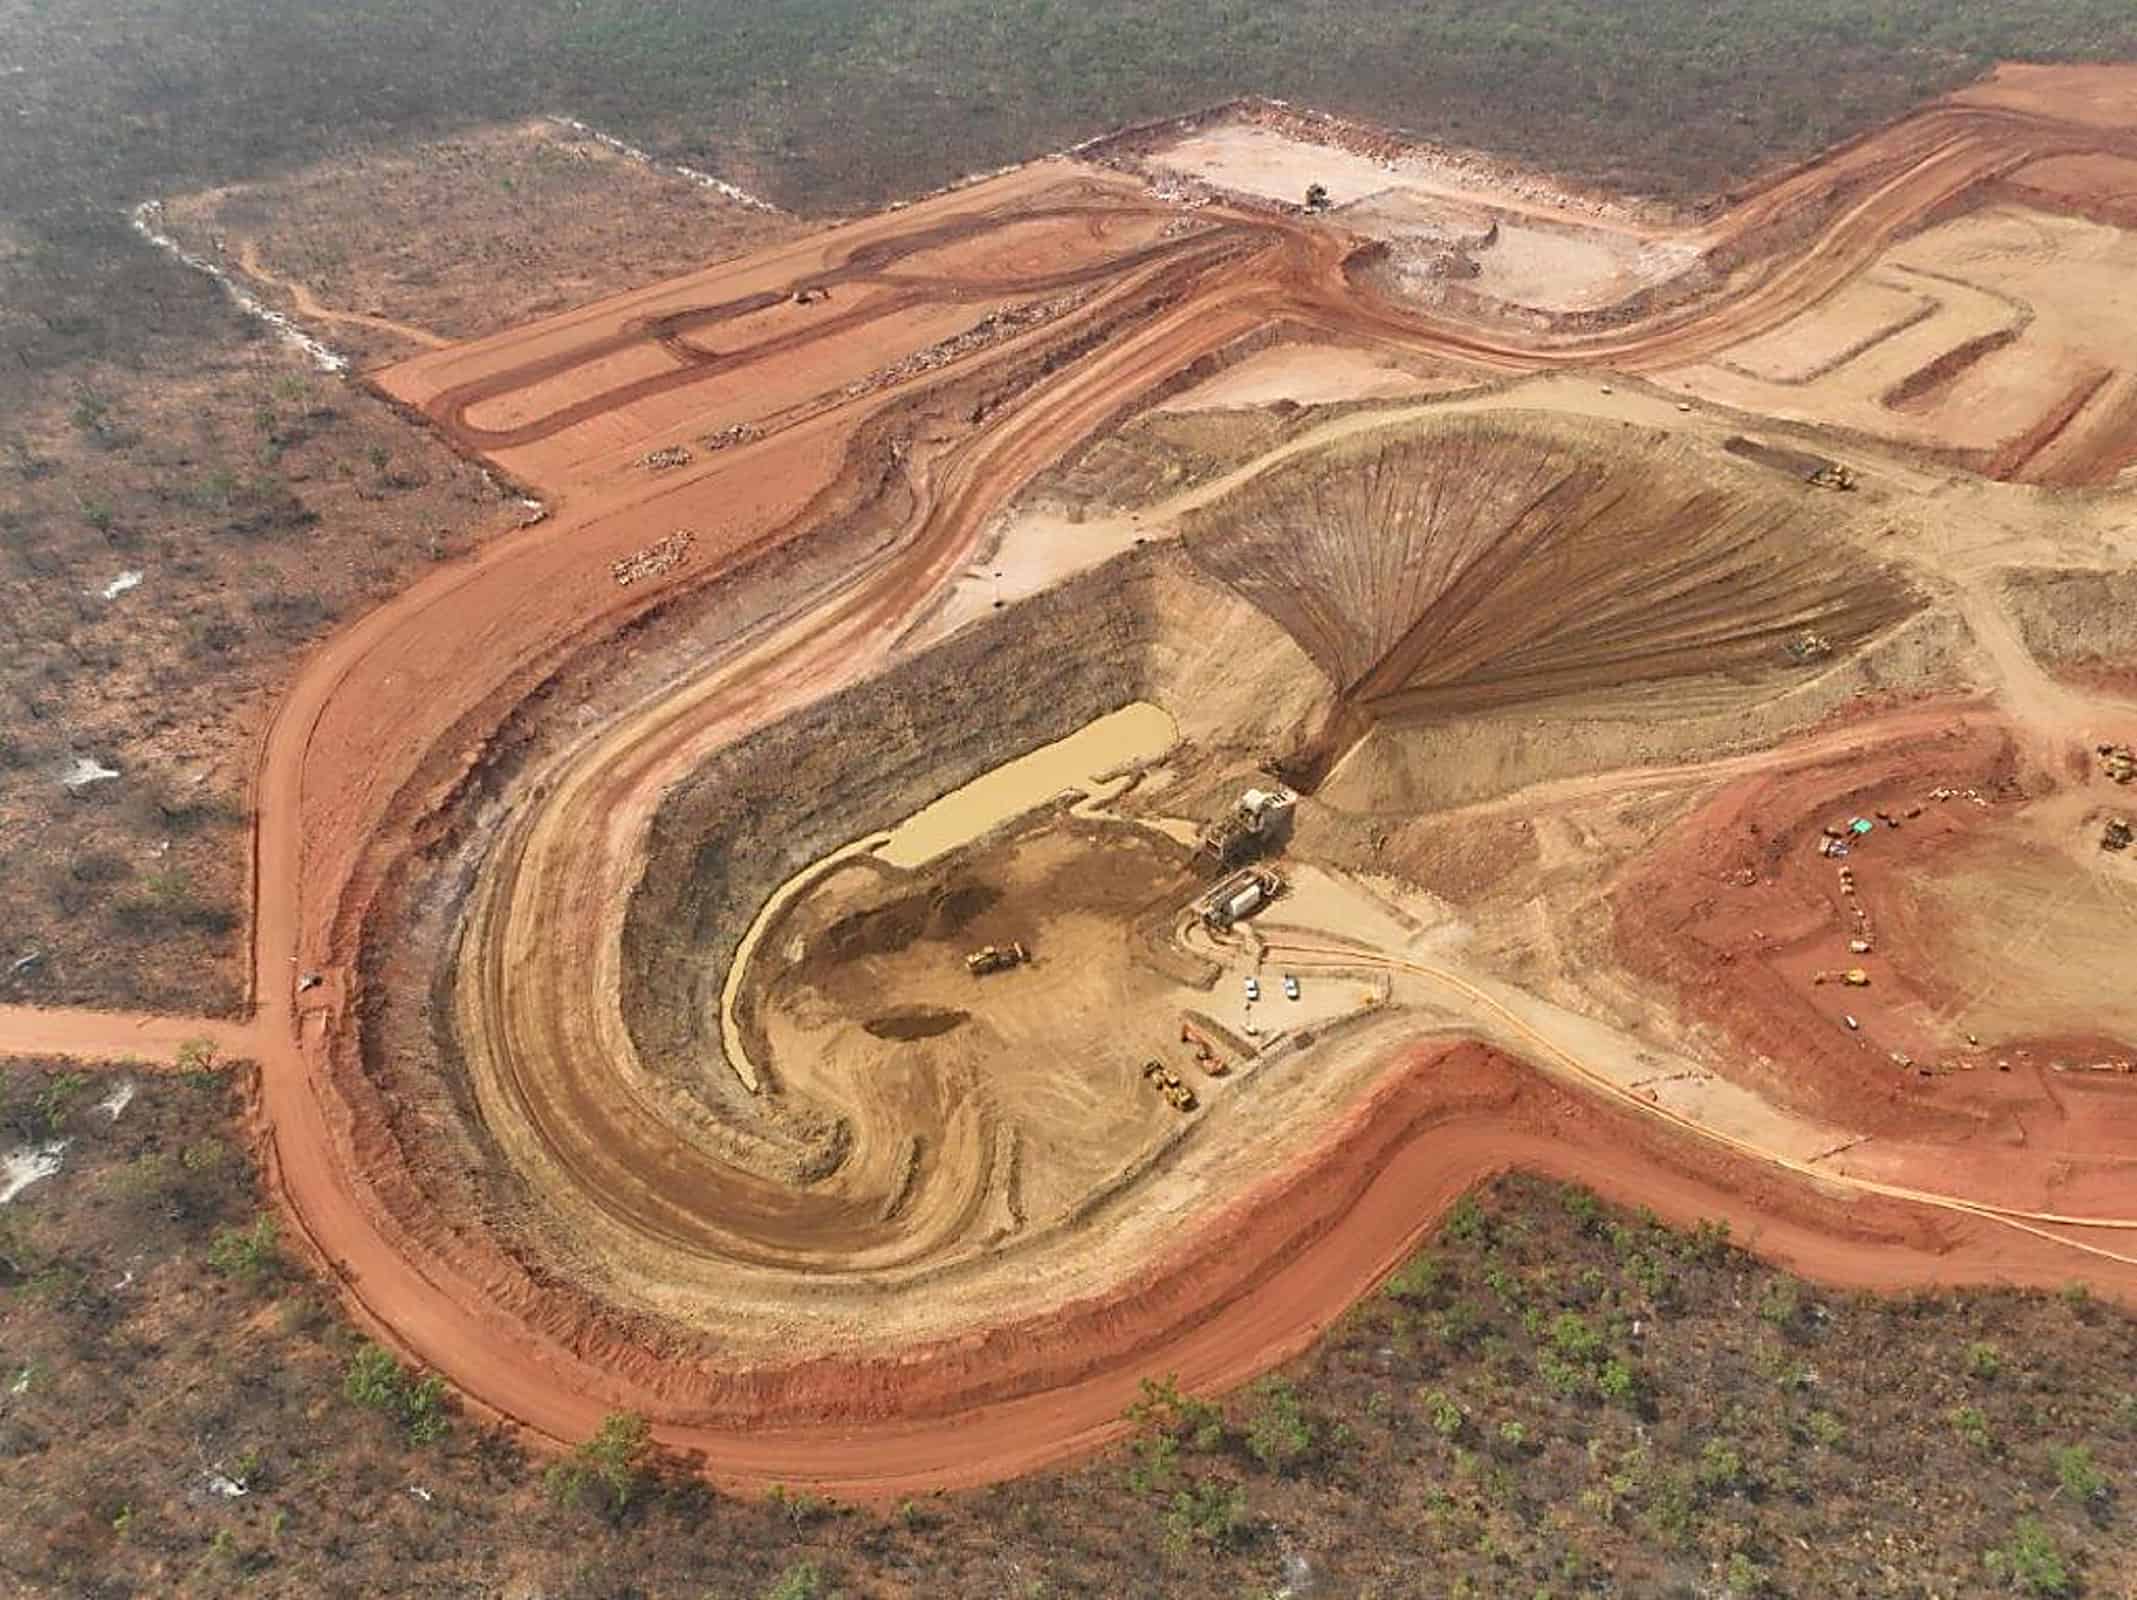 (Image source: Sheffield Resources) Aerial view of Thunderbird.